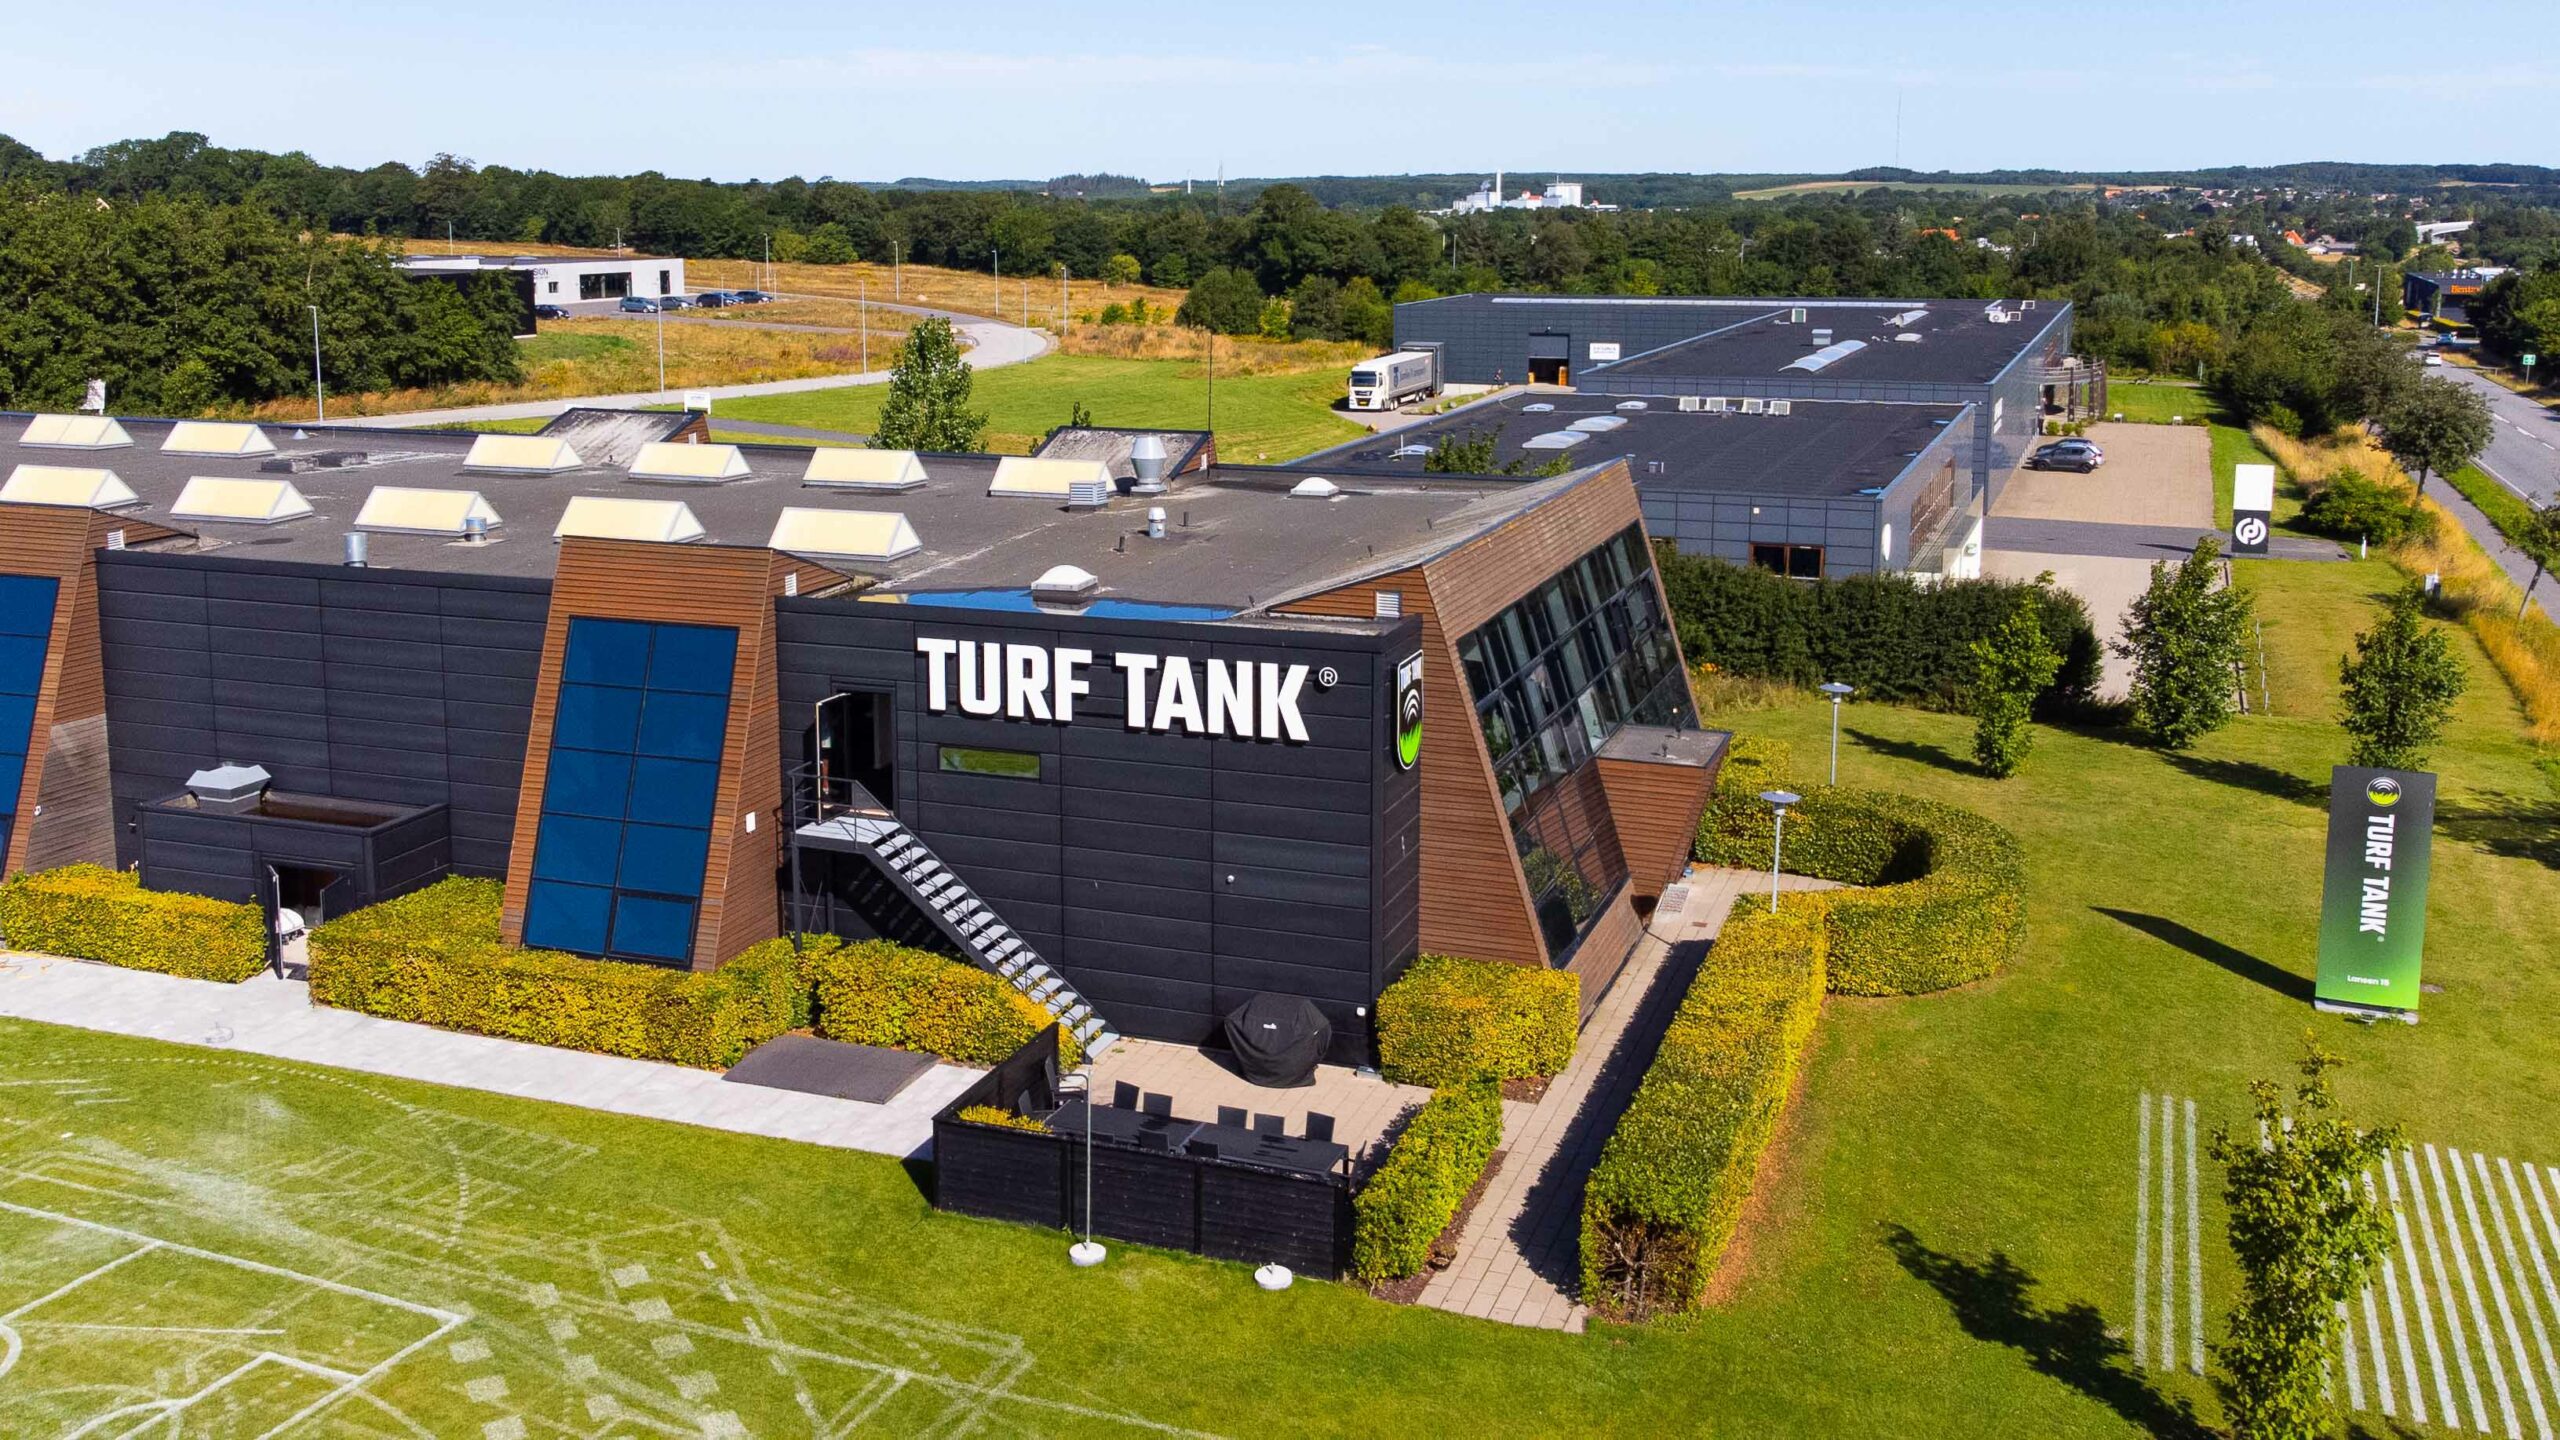 Picture of the Turf Tank headquarters based in Svenstrup, Denmark